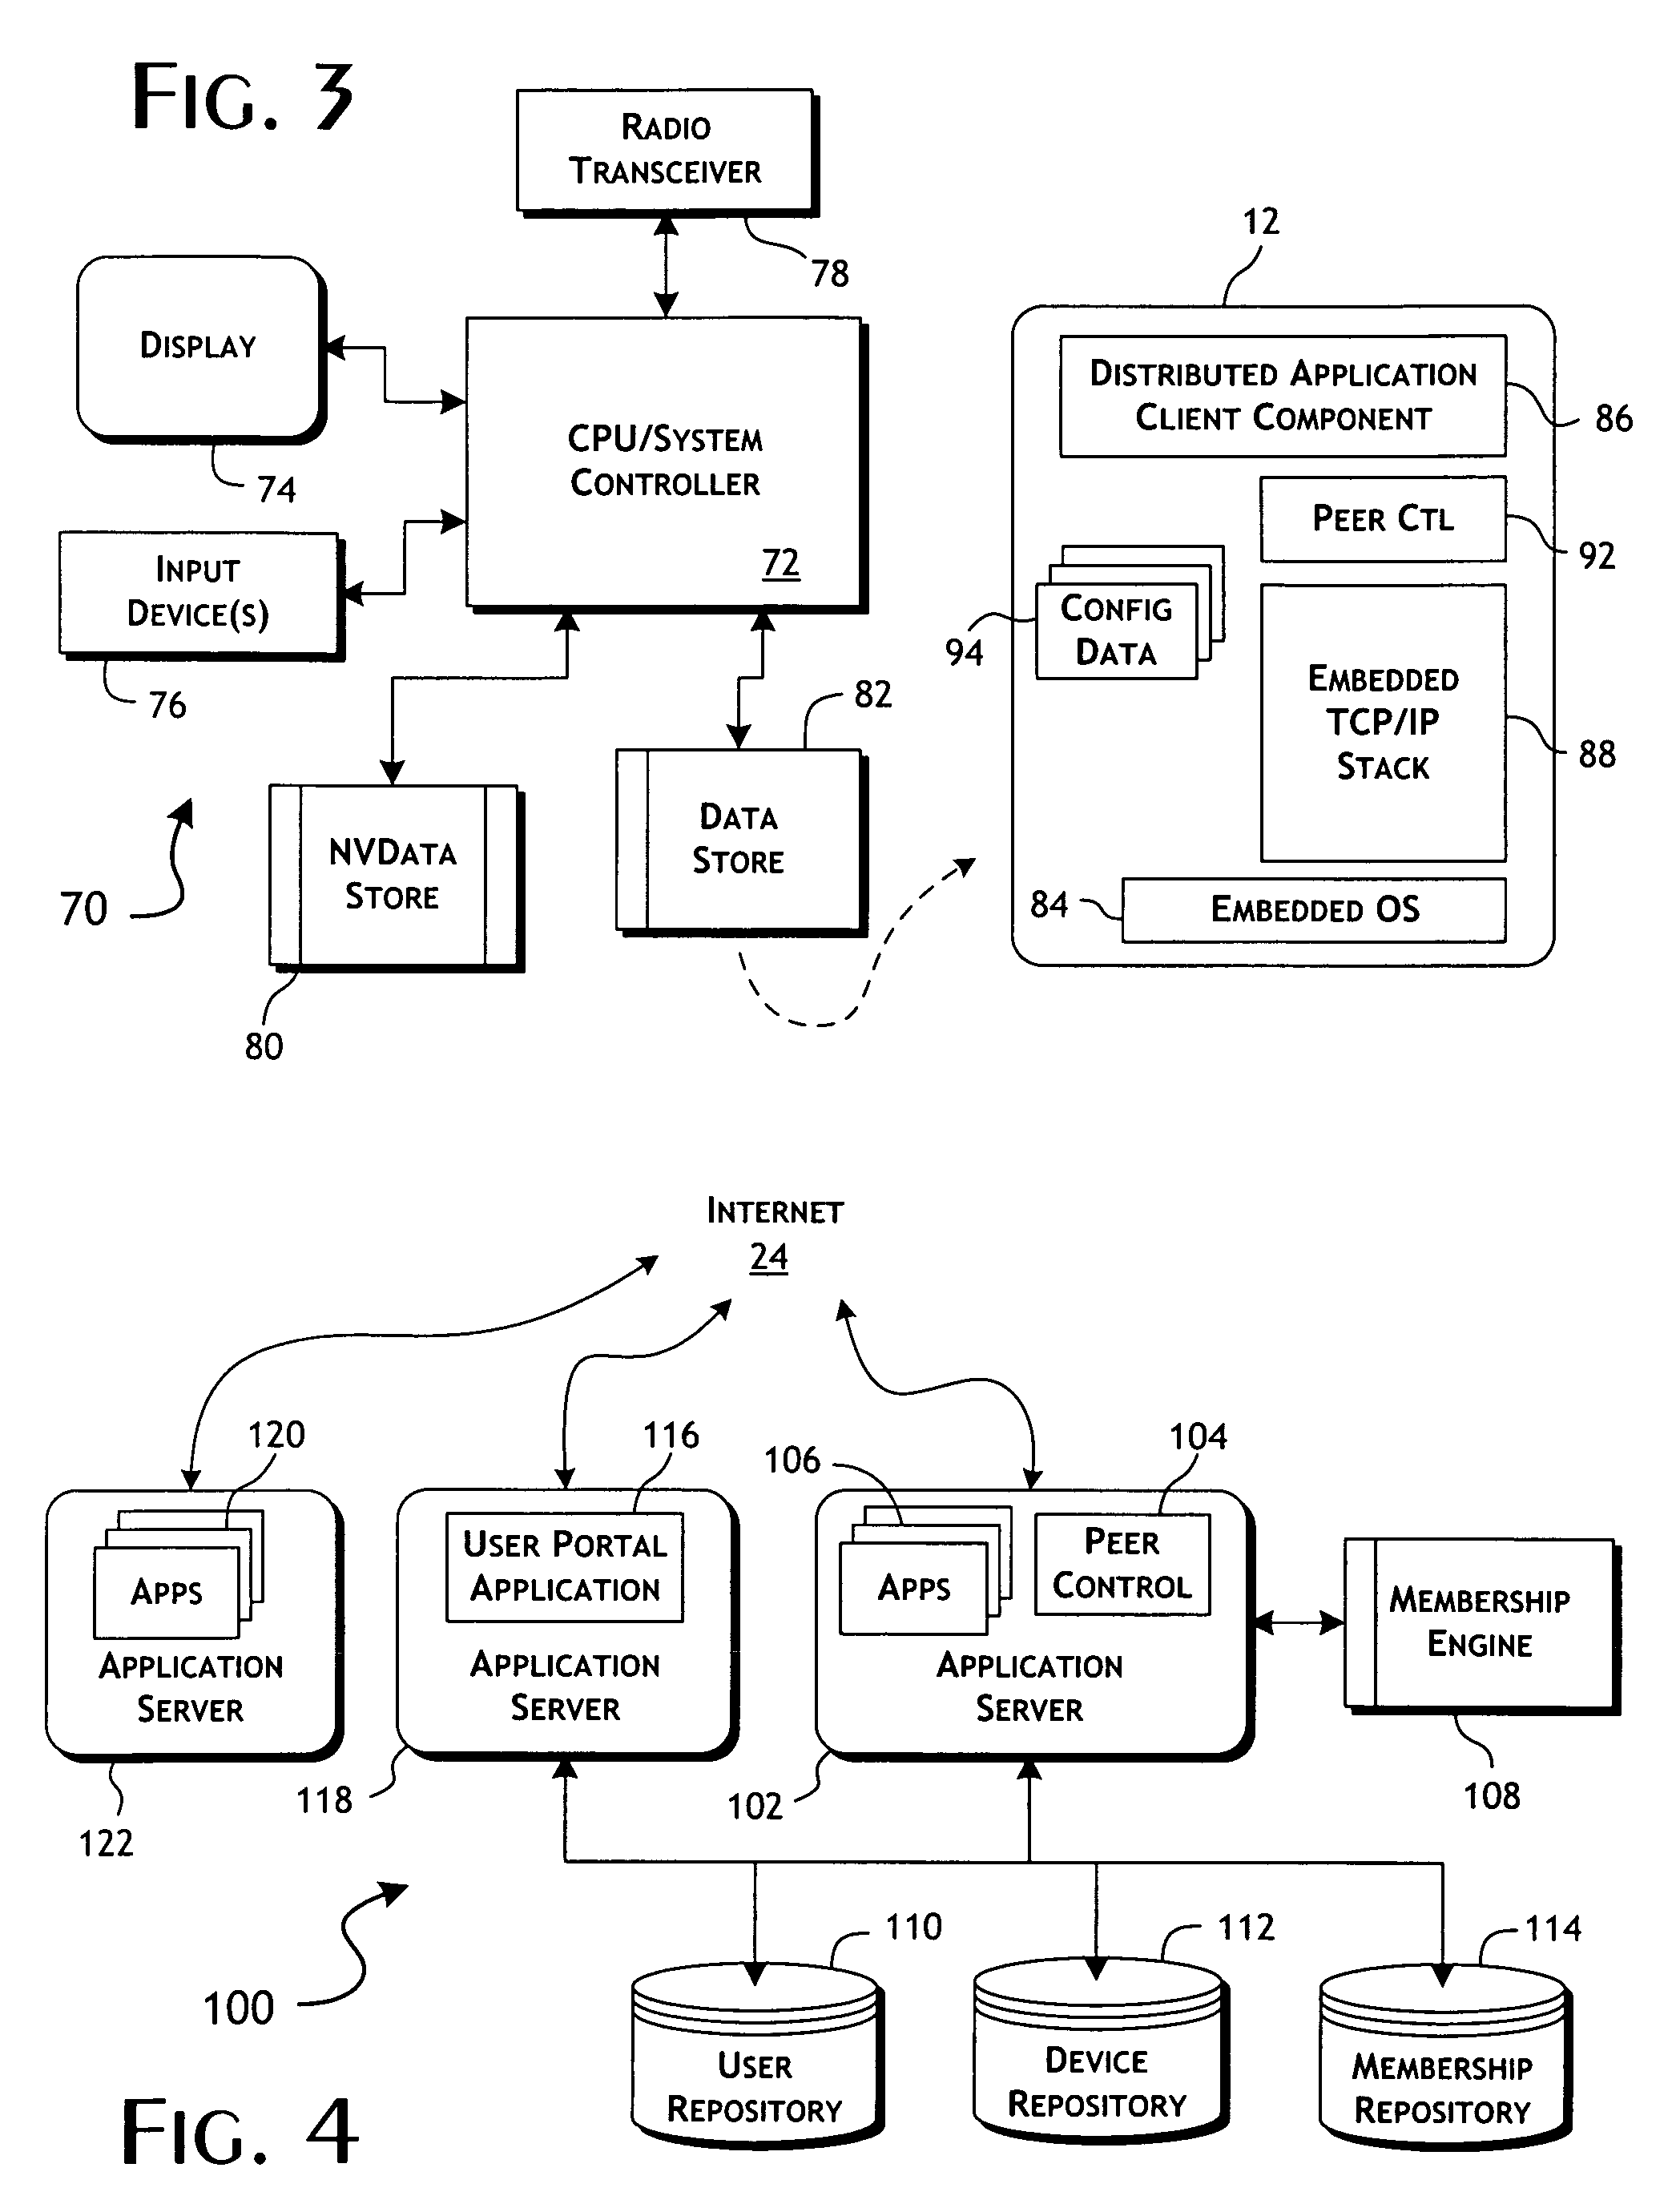 Peer shared server event notification system and methods